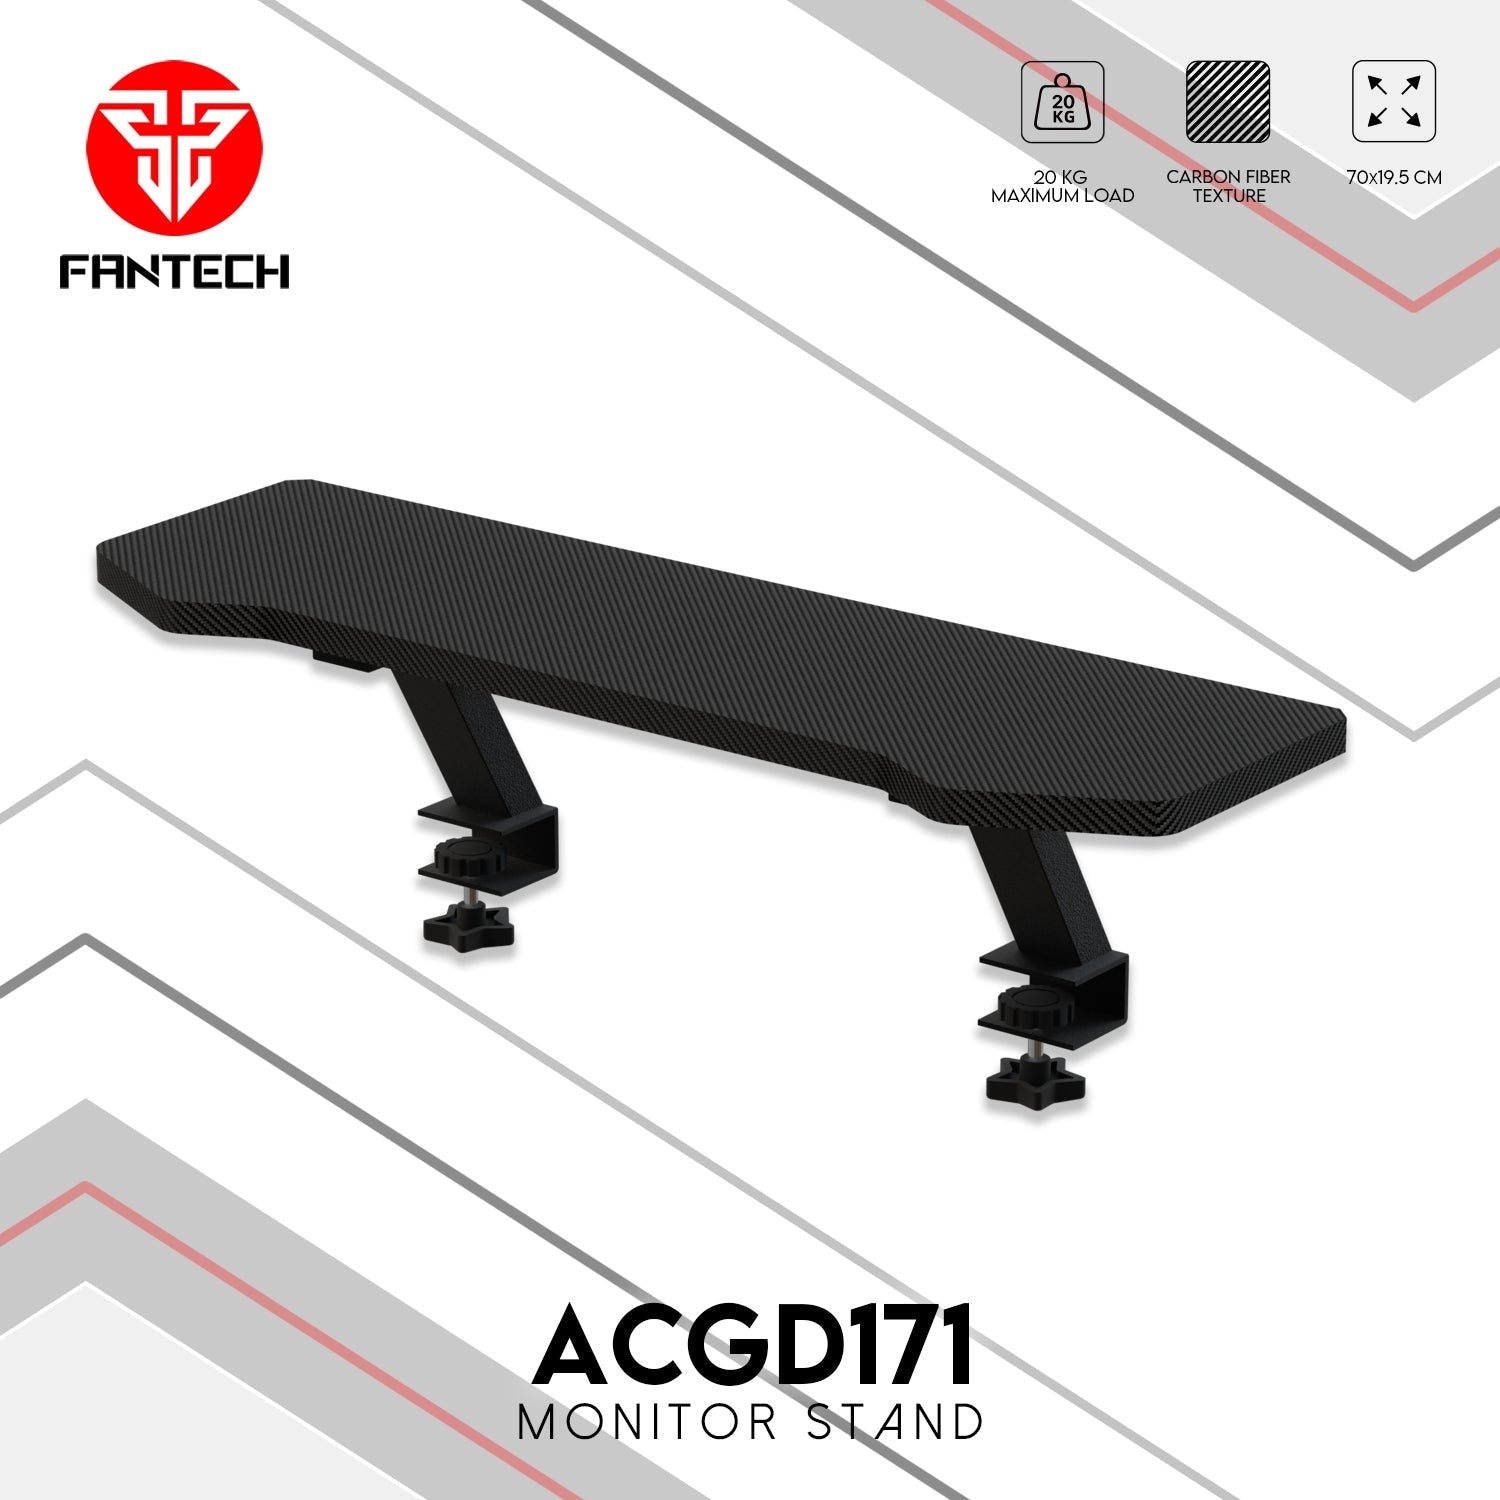 Fantech ACGD171 Monitor Stand Premium Material and Maximized Desk Space JOD 25